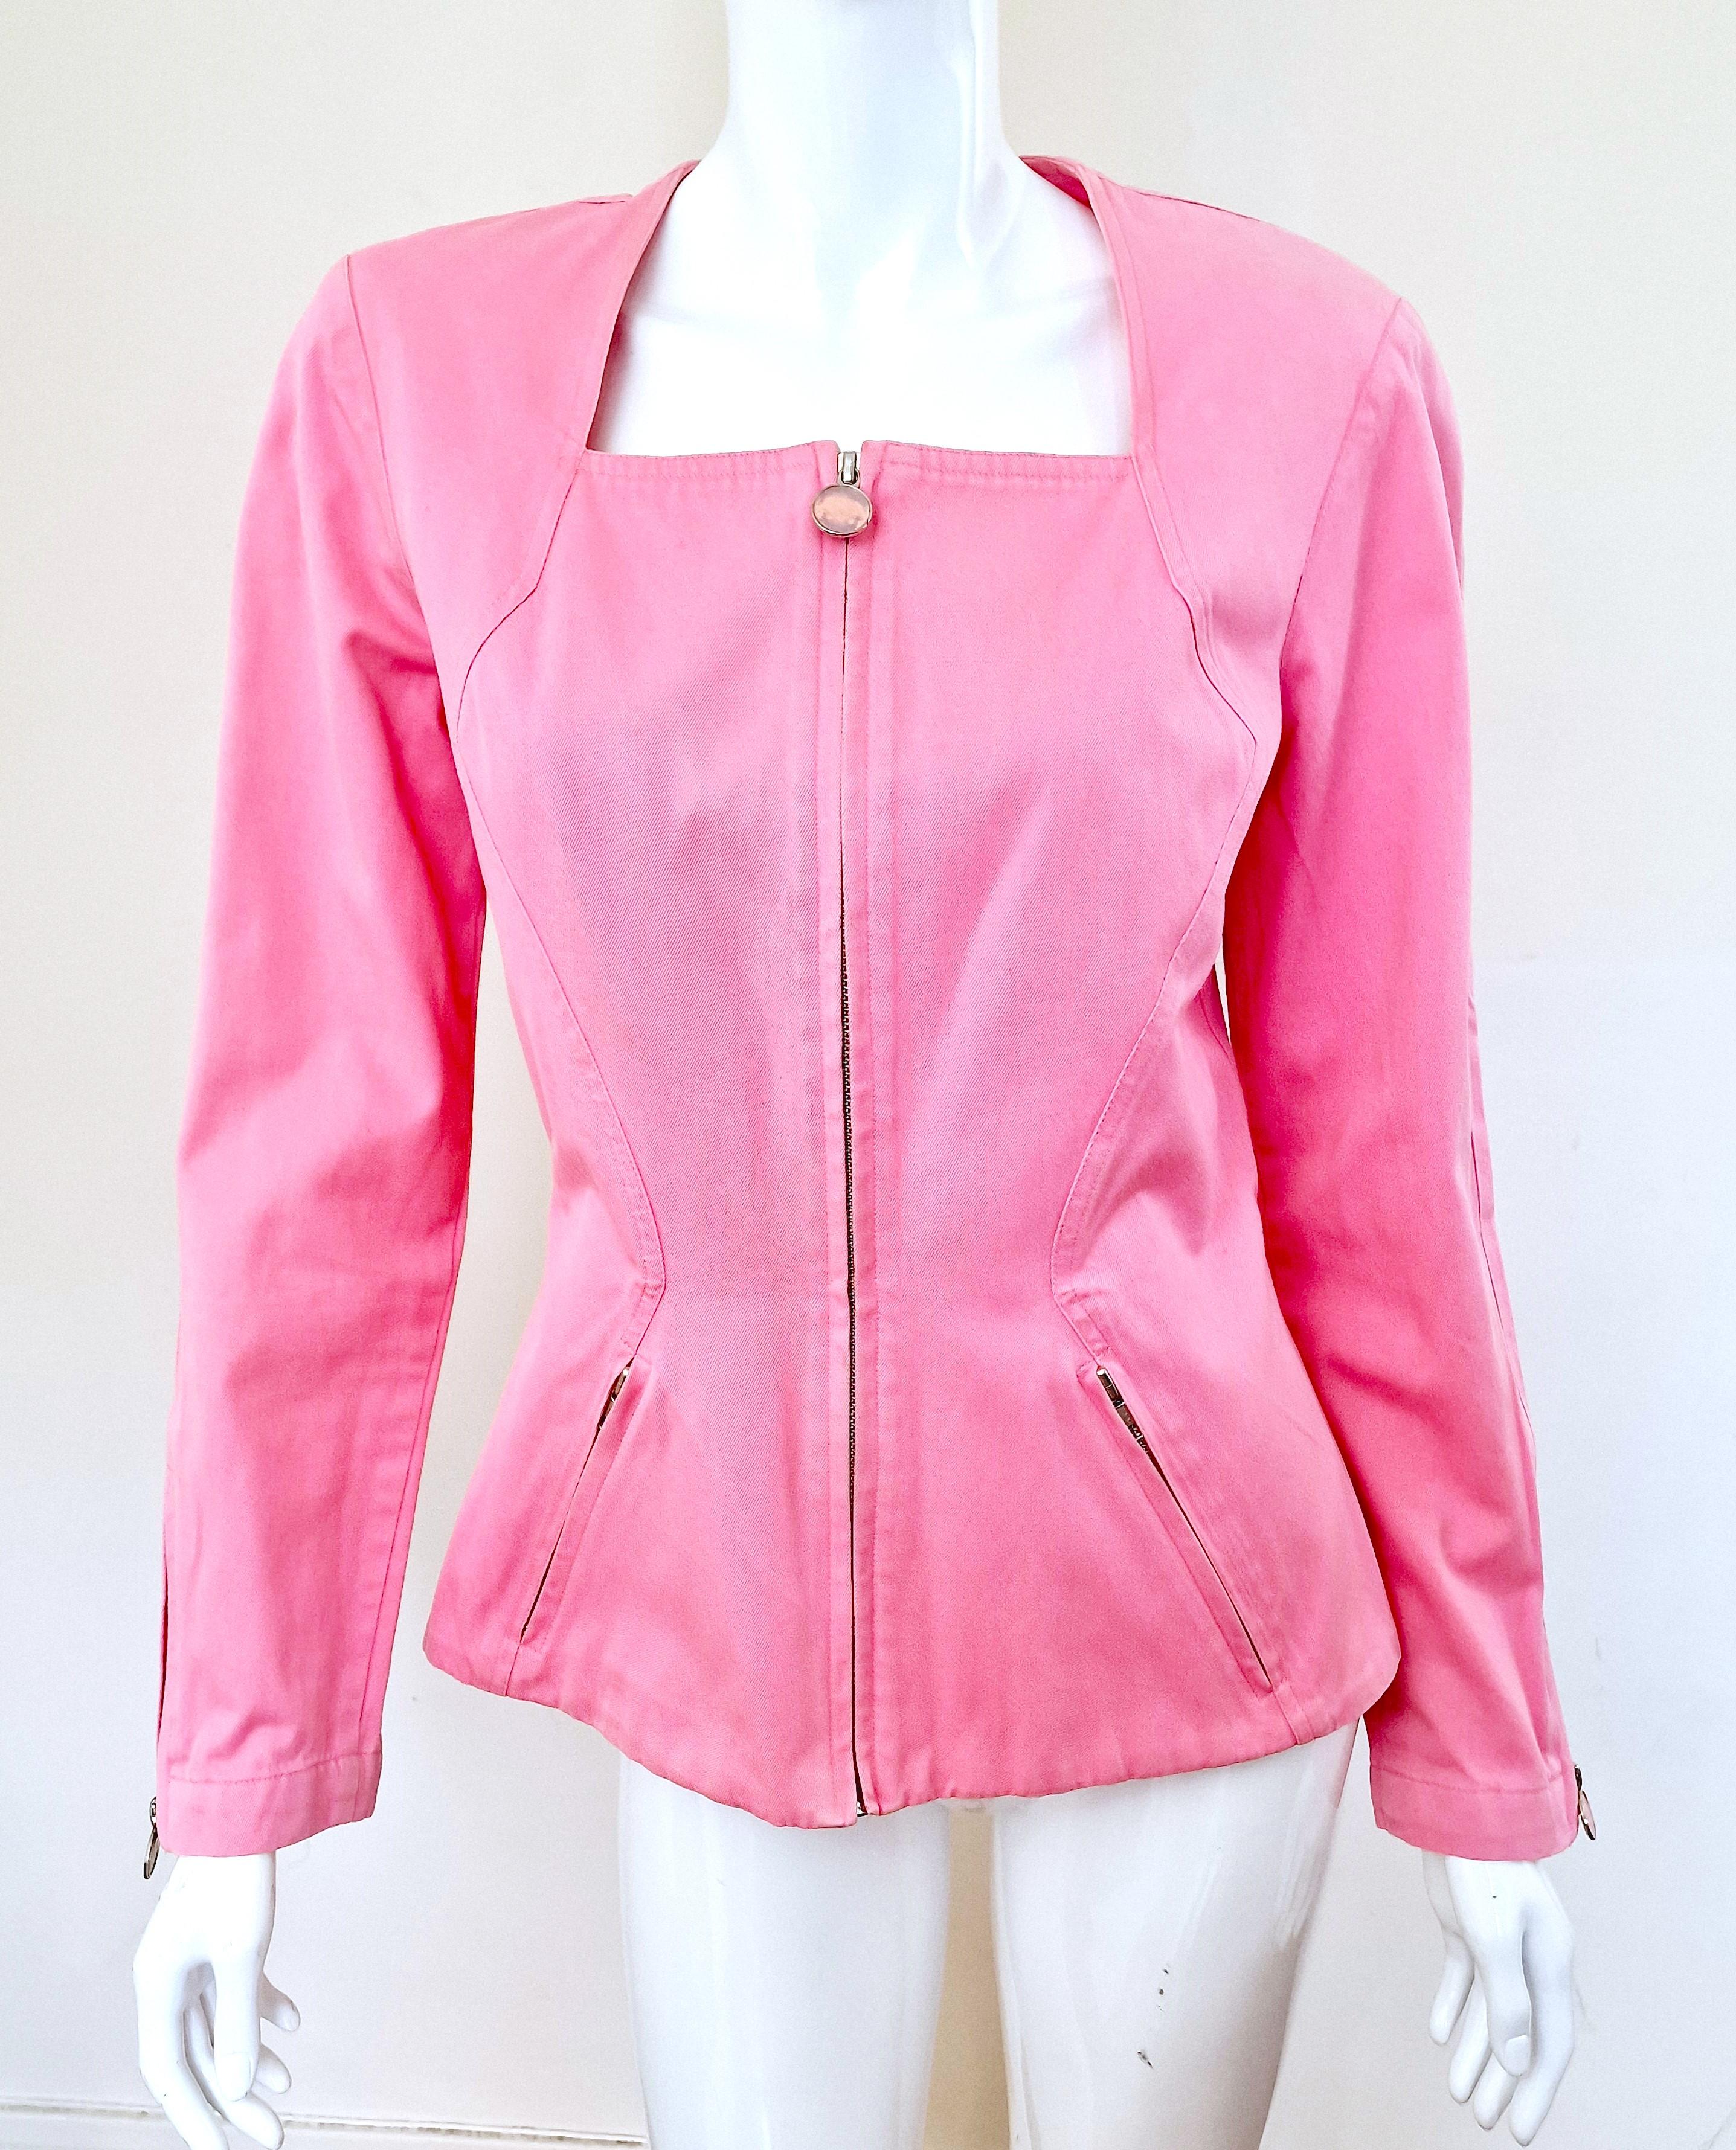 Pink rose jacket by Thierry Mugler
With shoulder pads!
Metal zipper on the front and on the sleeves. One side is *MTM* sign the other is shiny pink color.
2 front pockets.

VERY GOOD condition!

Medium.
No size label.
Length: 60 cm / 23.6 inch
Bust: